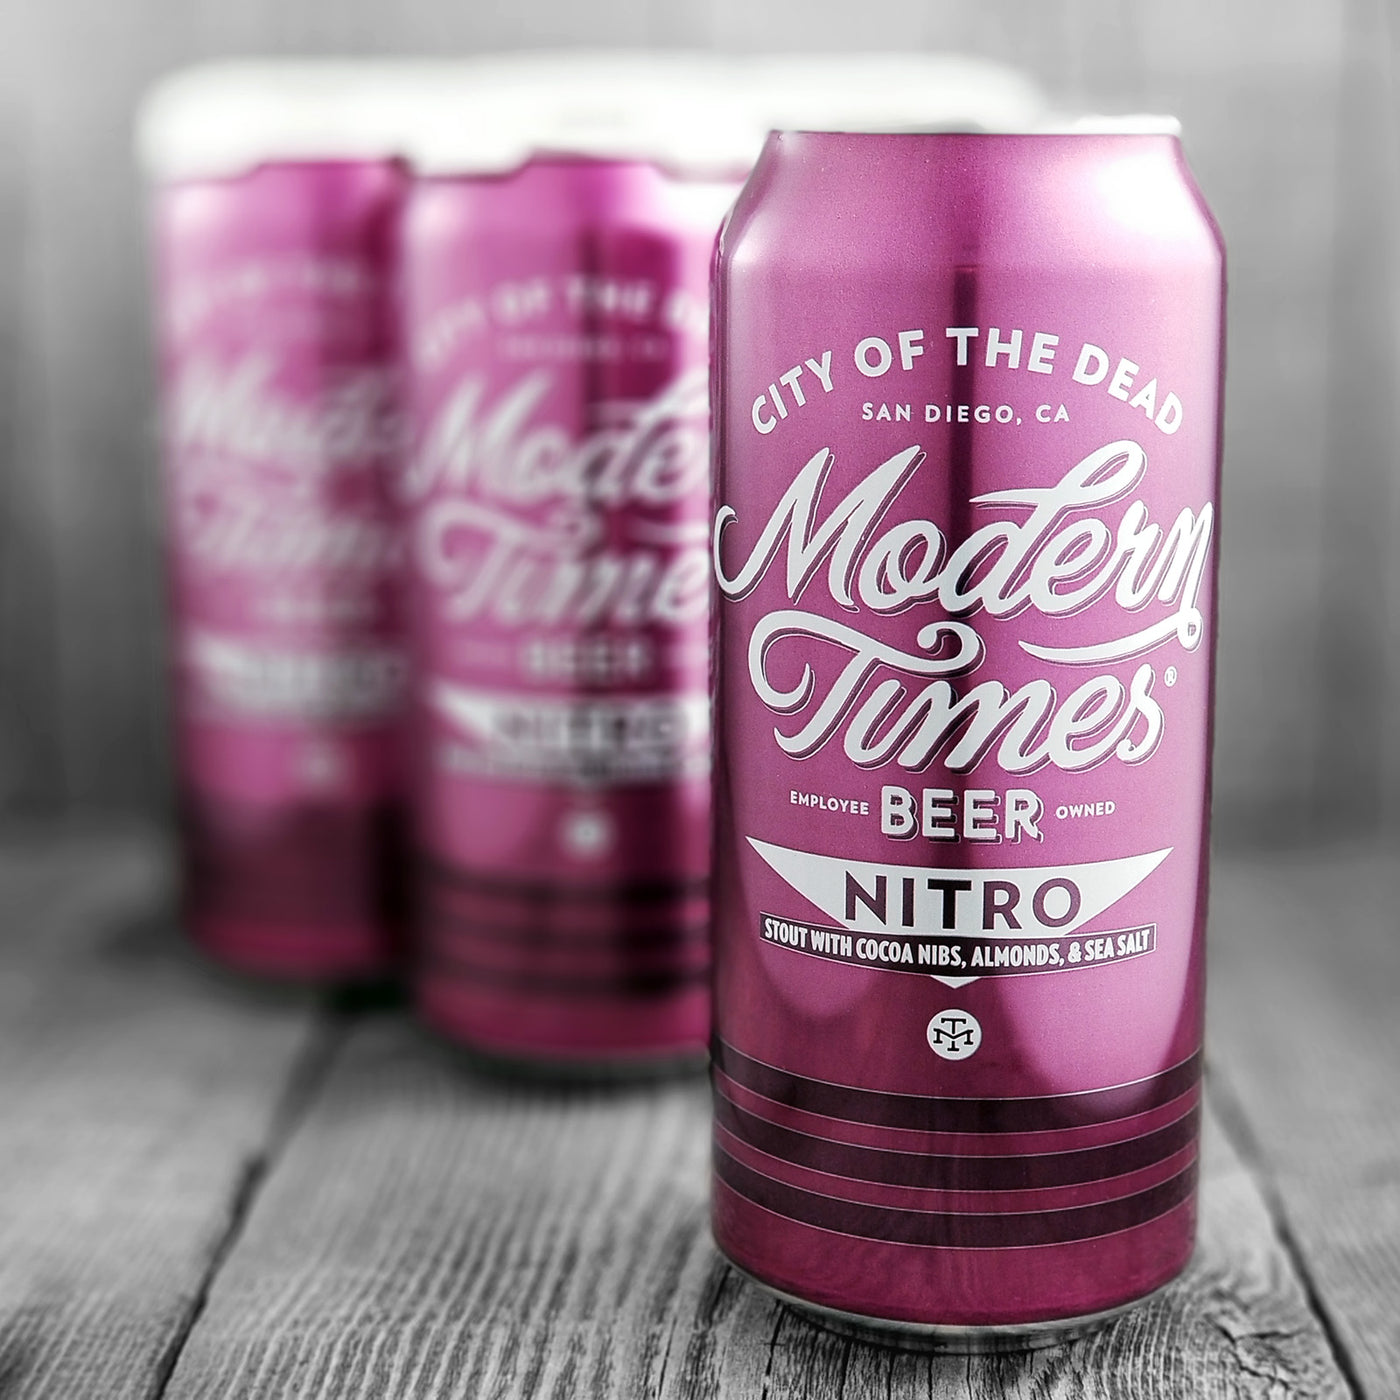 Modern Times City of the Dead Nitro